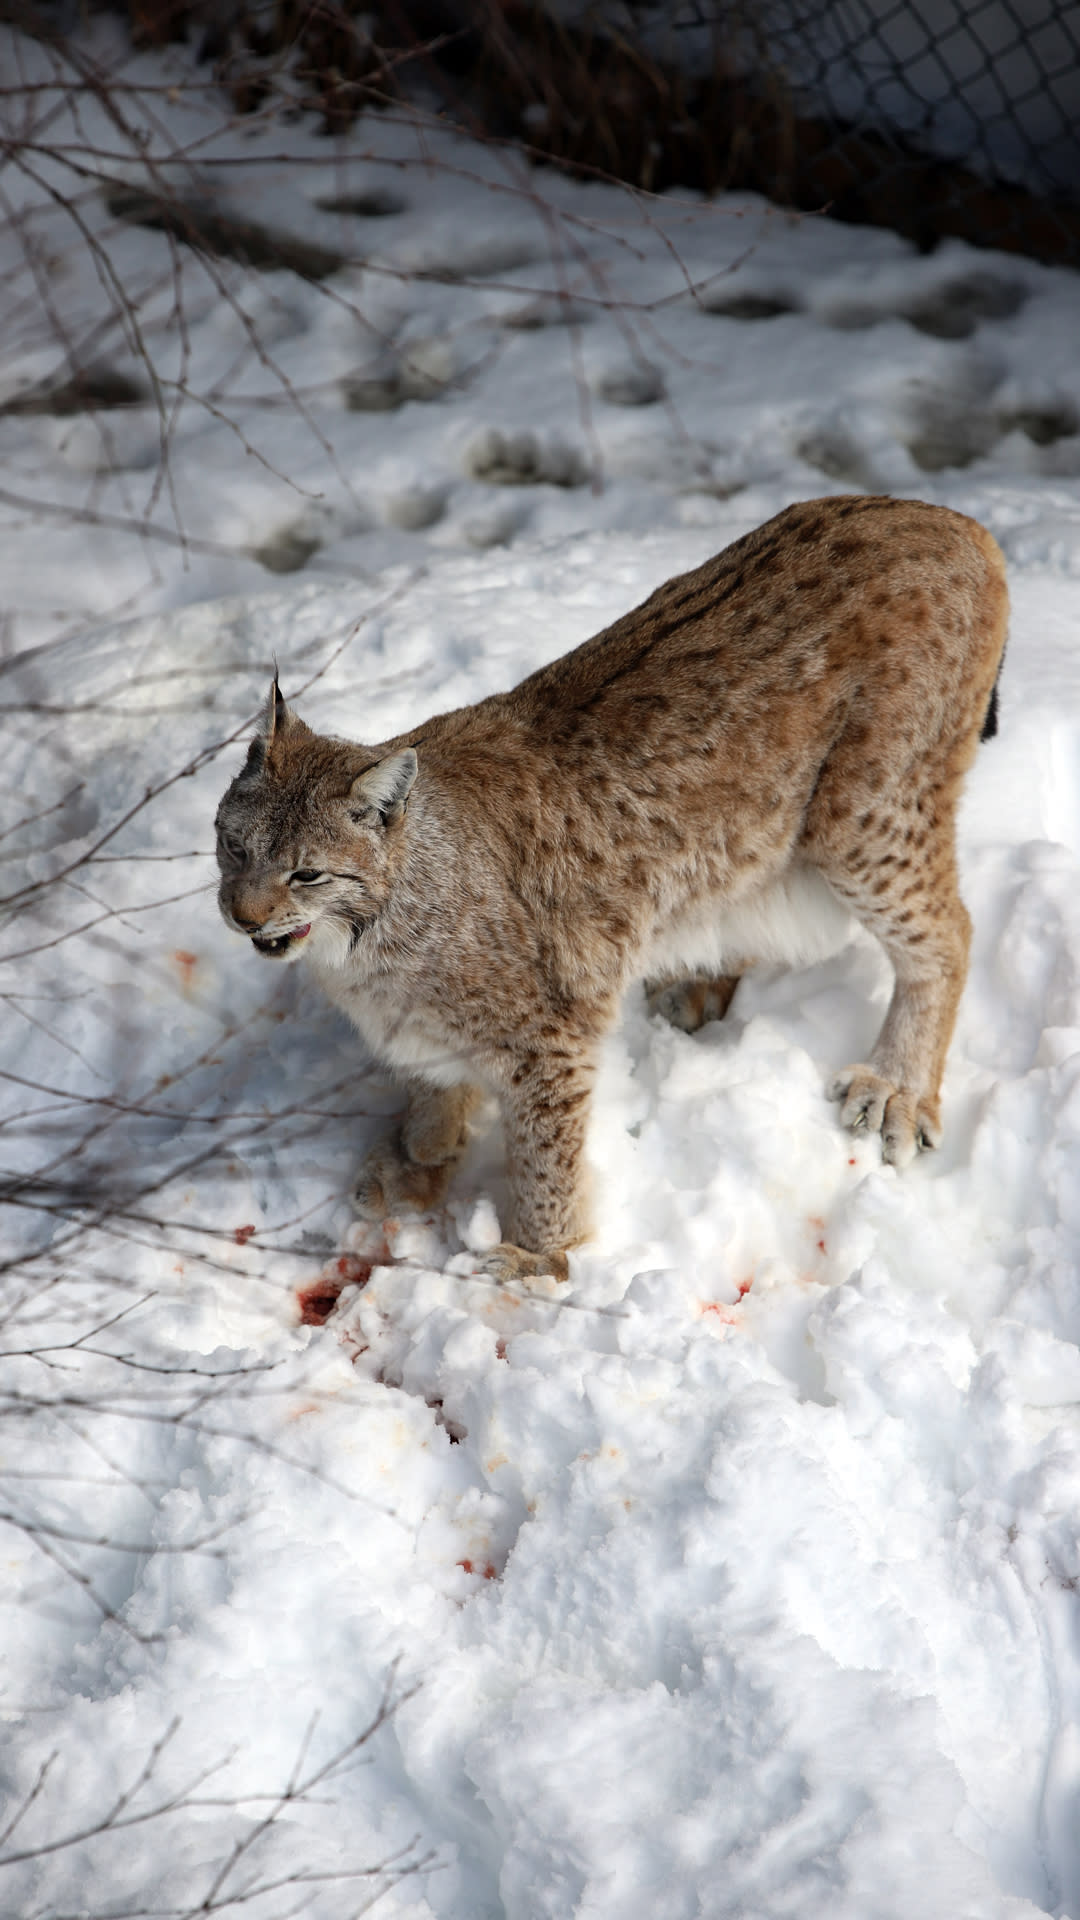 The court ordered the suspension of some lynx hunting permits